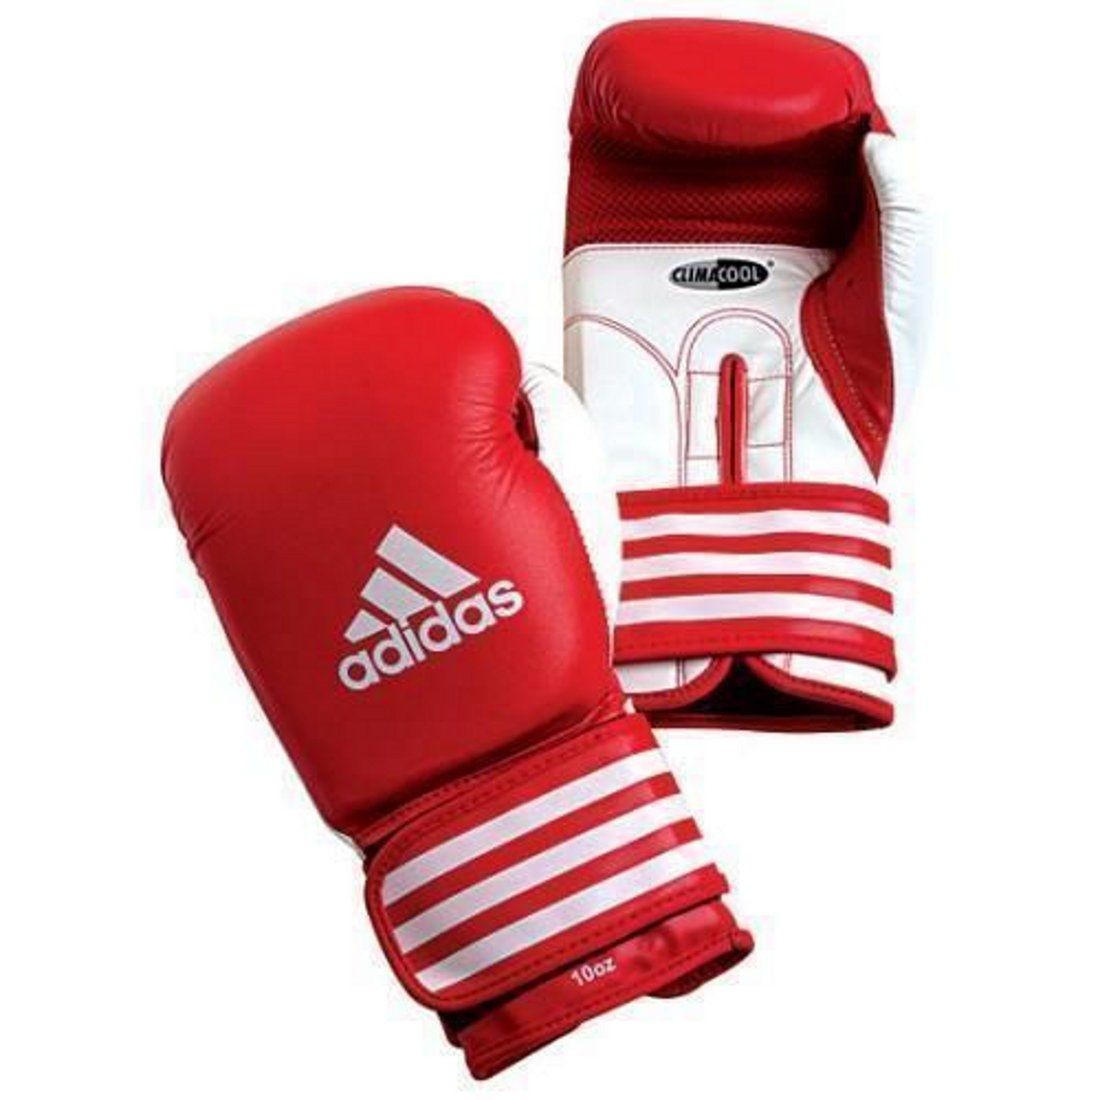 Adidas ULTIMA Competition Boxing Gloves | Adidas Boxing Gloves ...